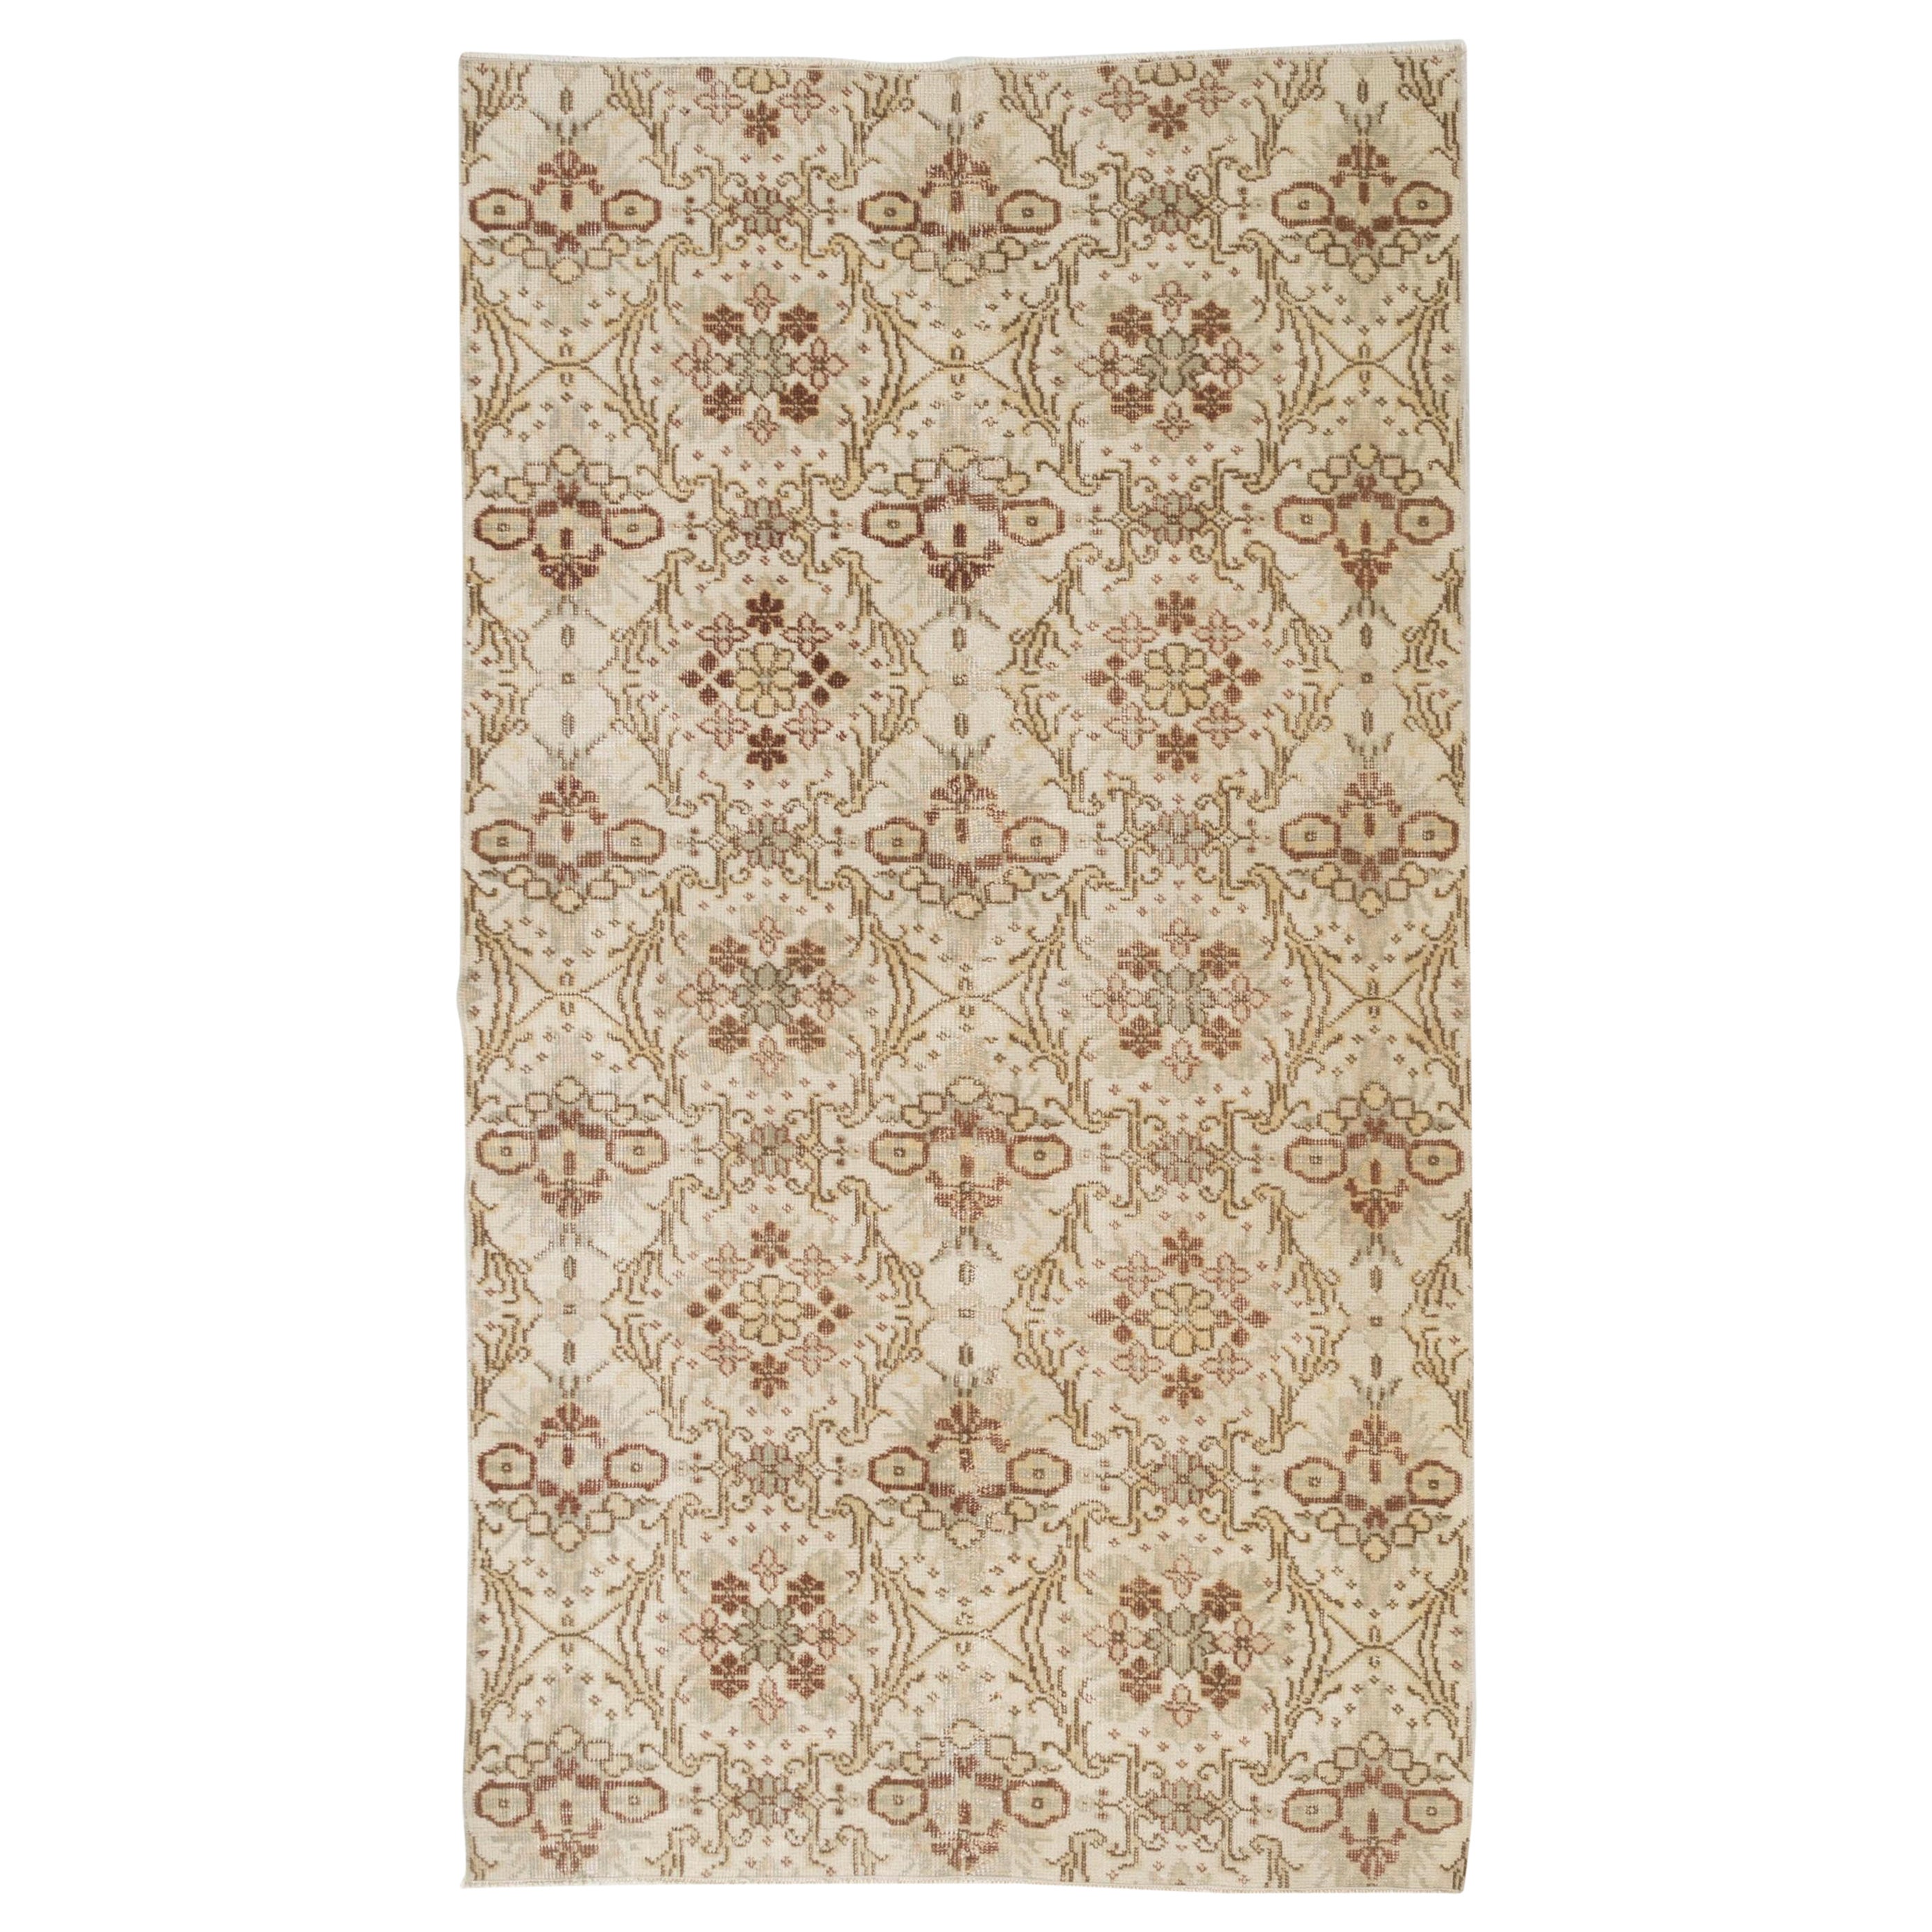 4 x 6.8 ft Hand-Knotted Vintage Turkish Oushak Accent Rug with Floral Design For Sale